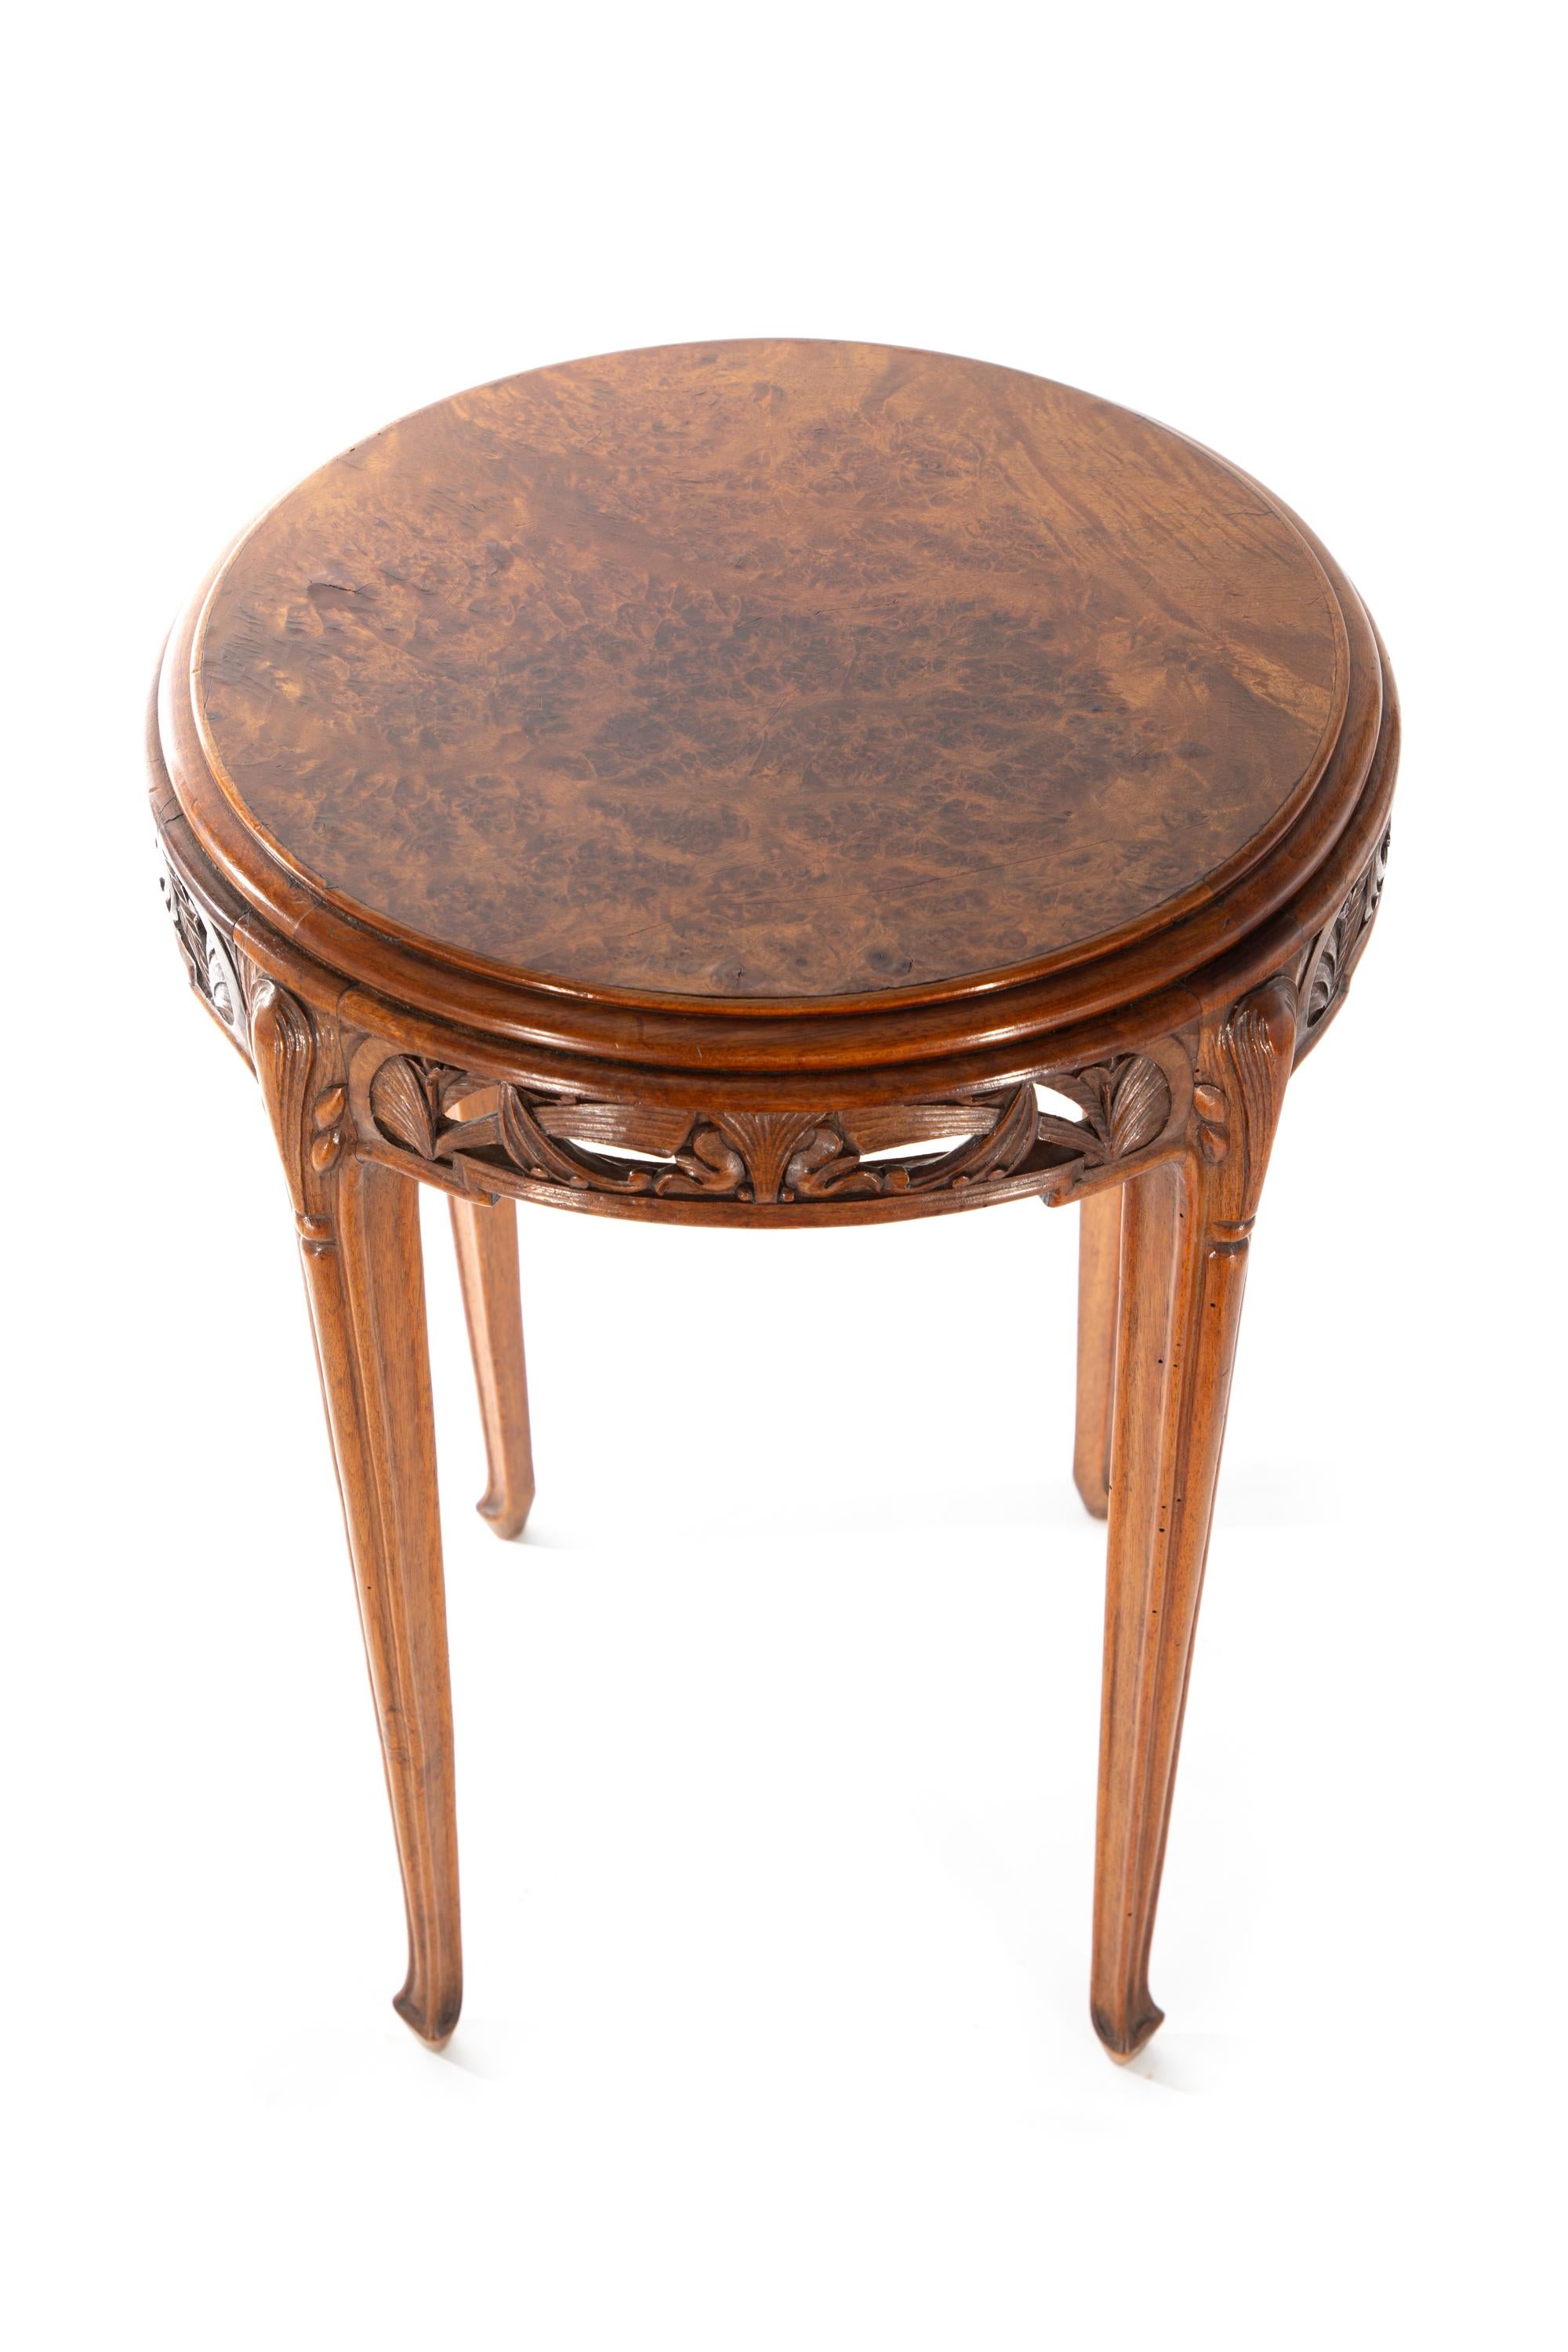 20th Century Round Art Deco Style End Table For Sale